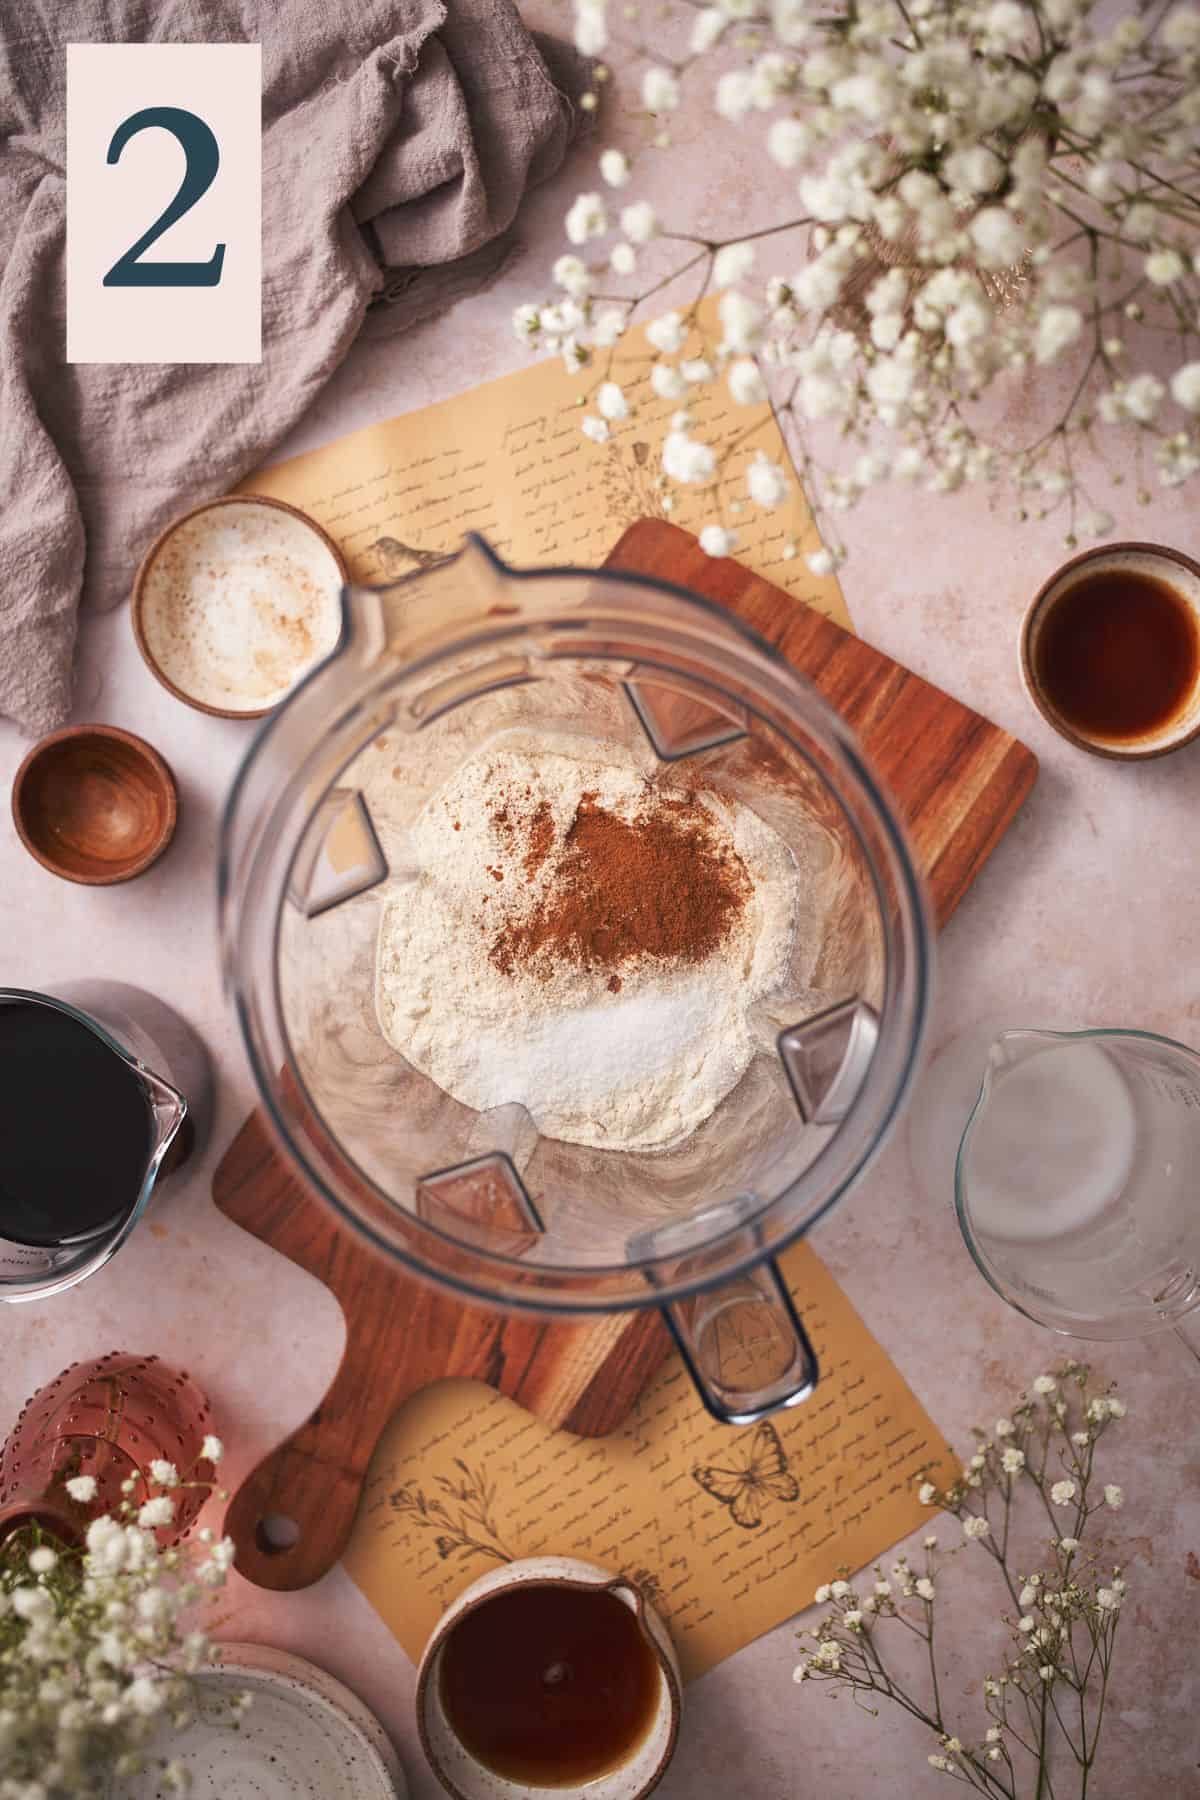 milk, protein powder, salt, and cinnamon in a blender jug, surrounded by other ingredients to make the drink, and white flowers.  